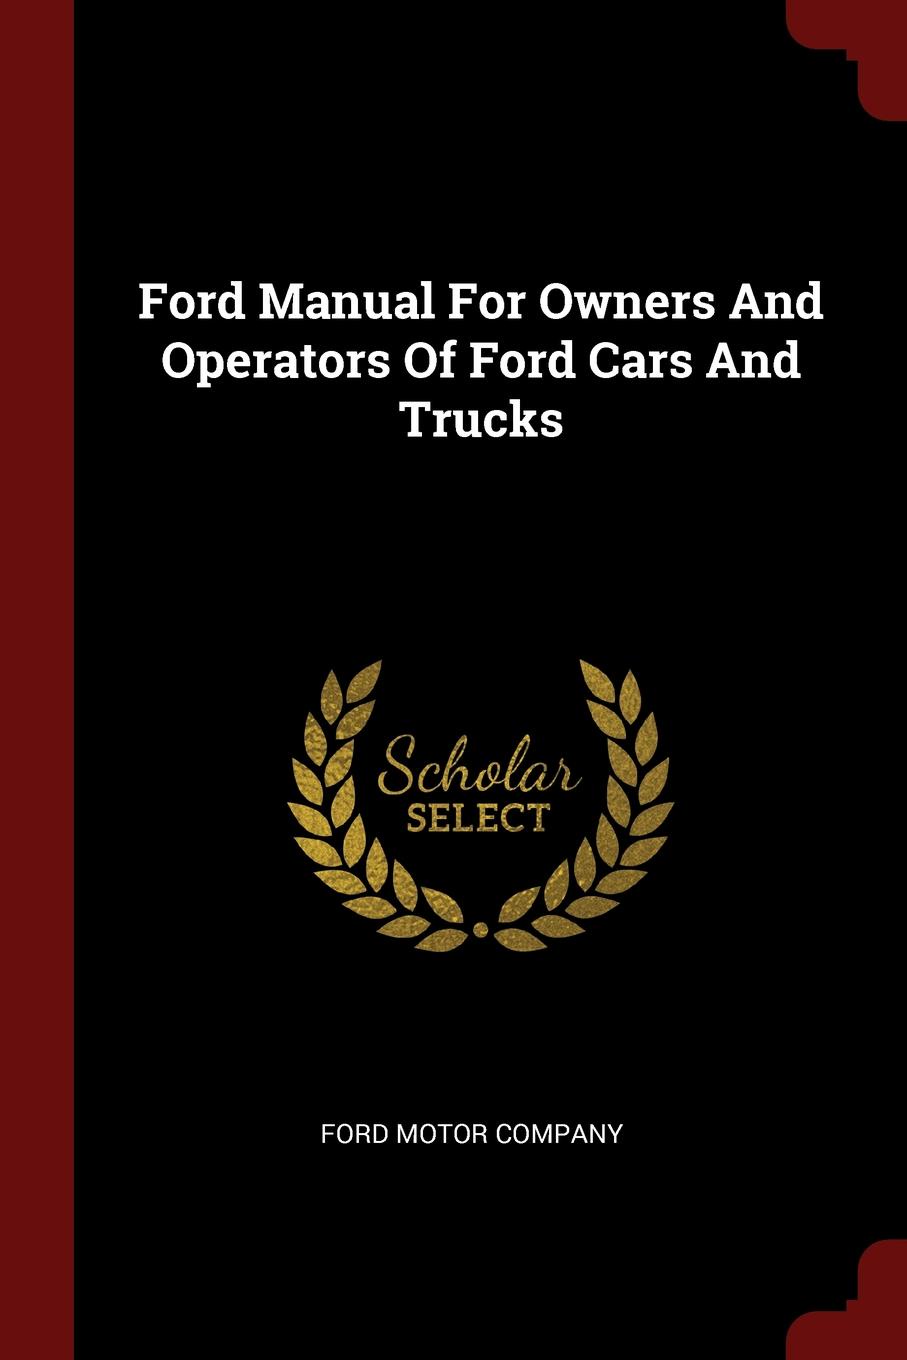 Ford Manual For Owners And Operators Of Ford Cars And Trucks